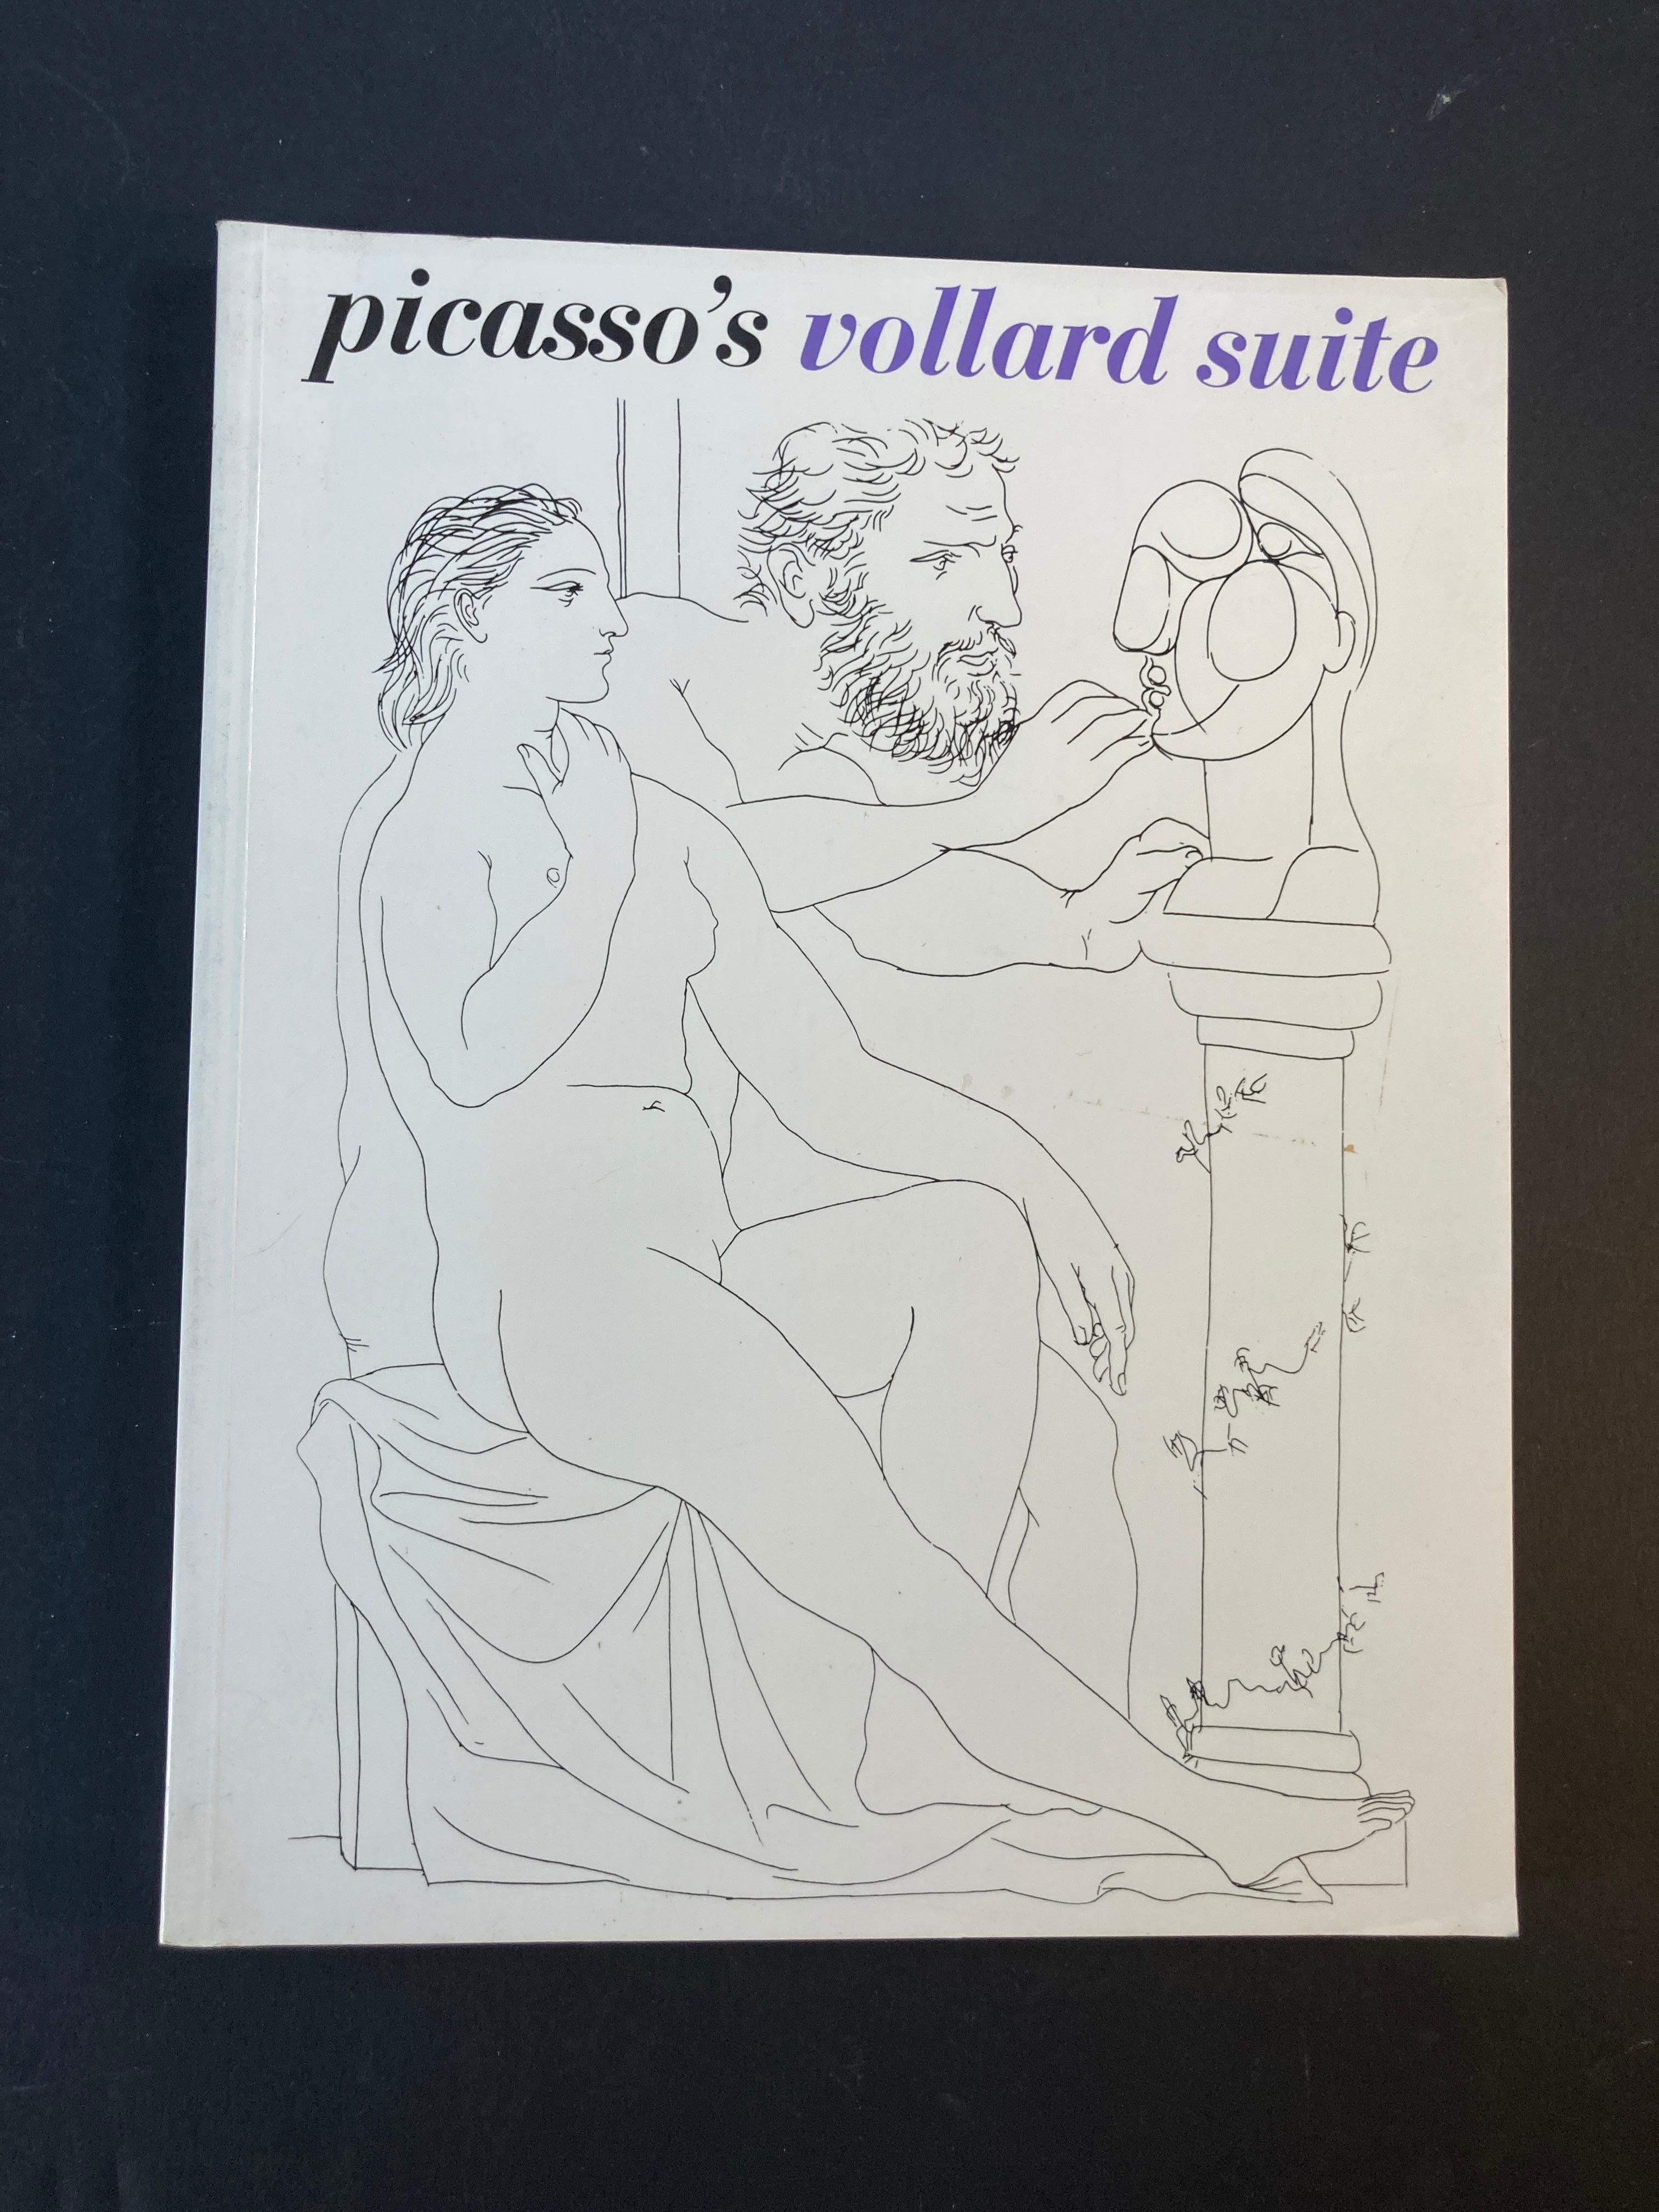 Picasso's Vollard Suite Book by Pablo Picasso. 
Soft cover, Paperback
